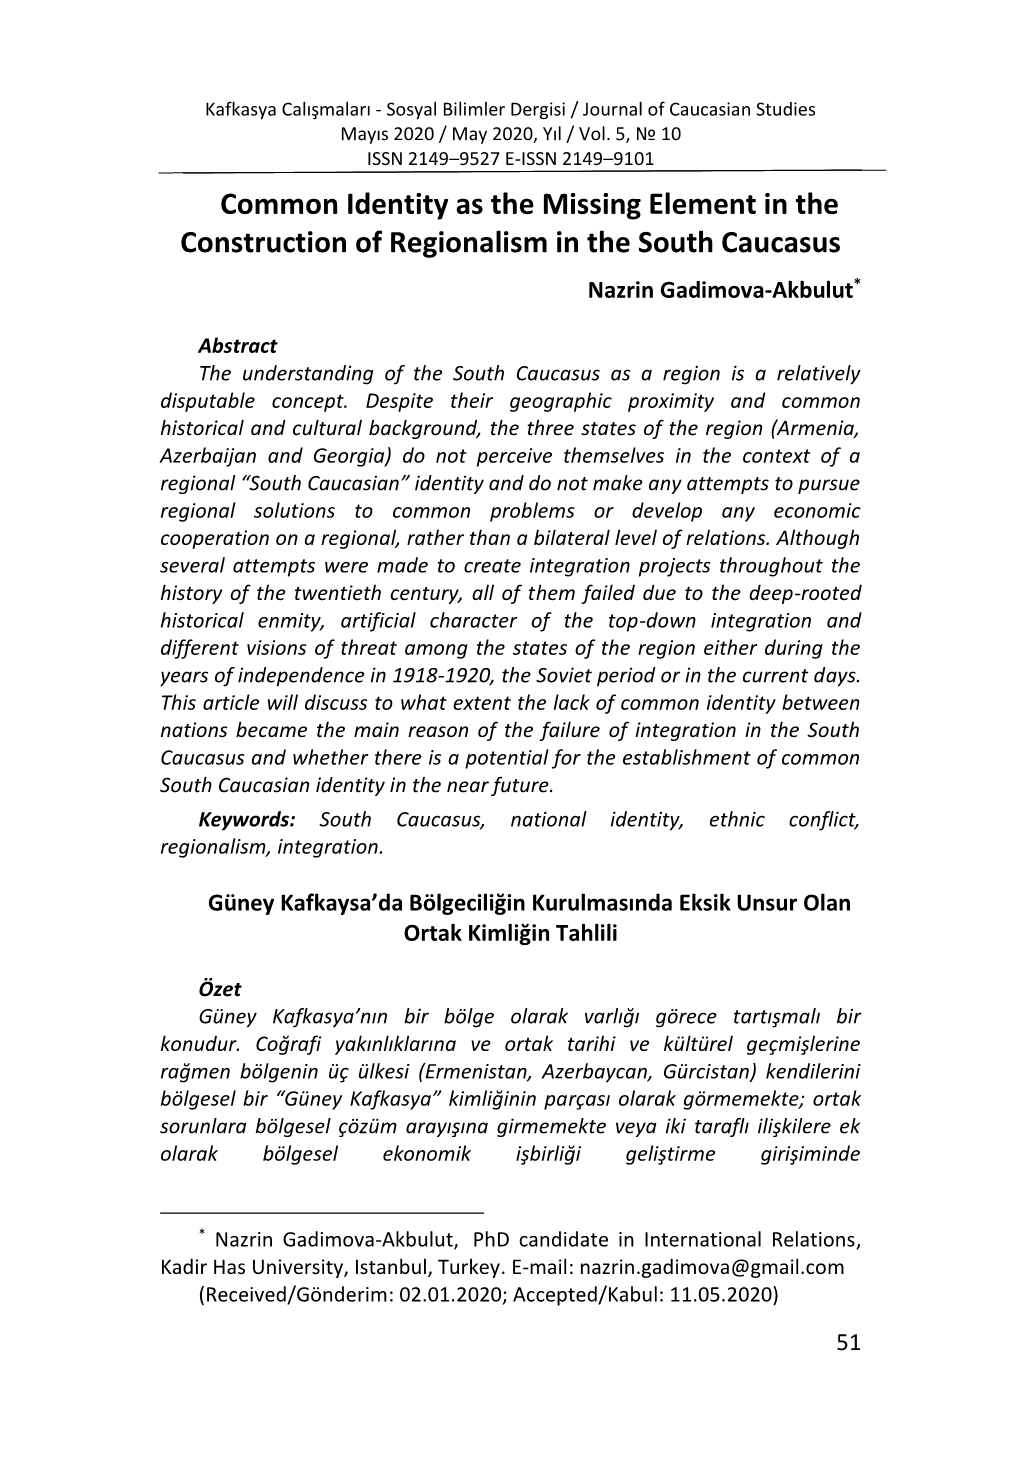 Common Identity As the Missing Element in the Construction of Regionalism in the South Caucasus Nazrin Gadimova-Akbulut*